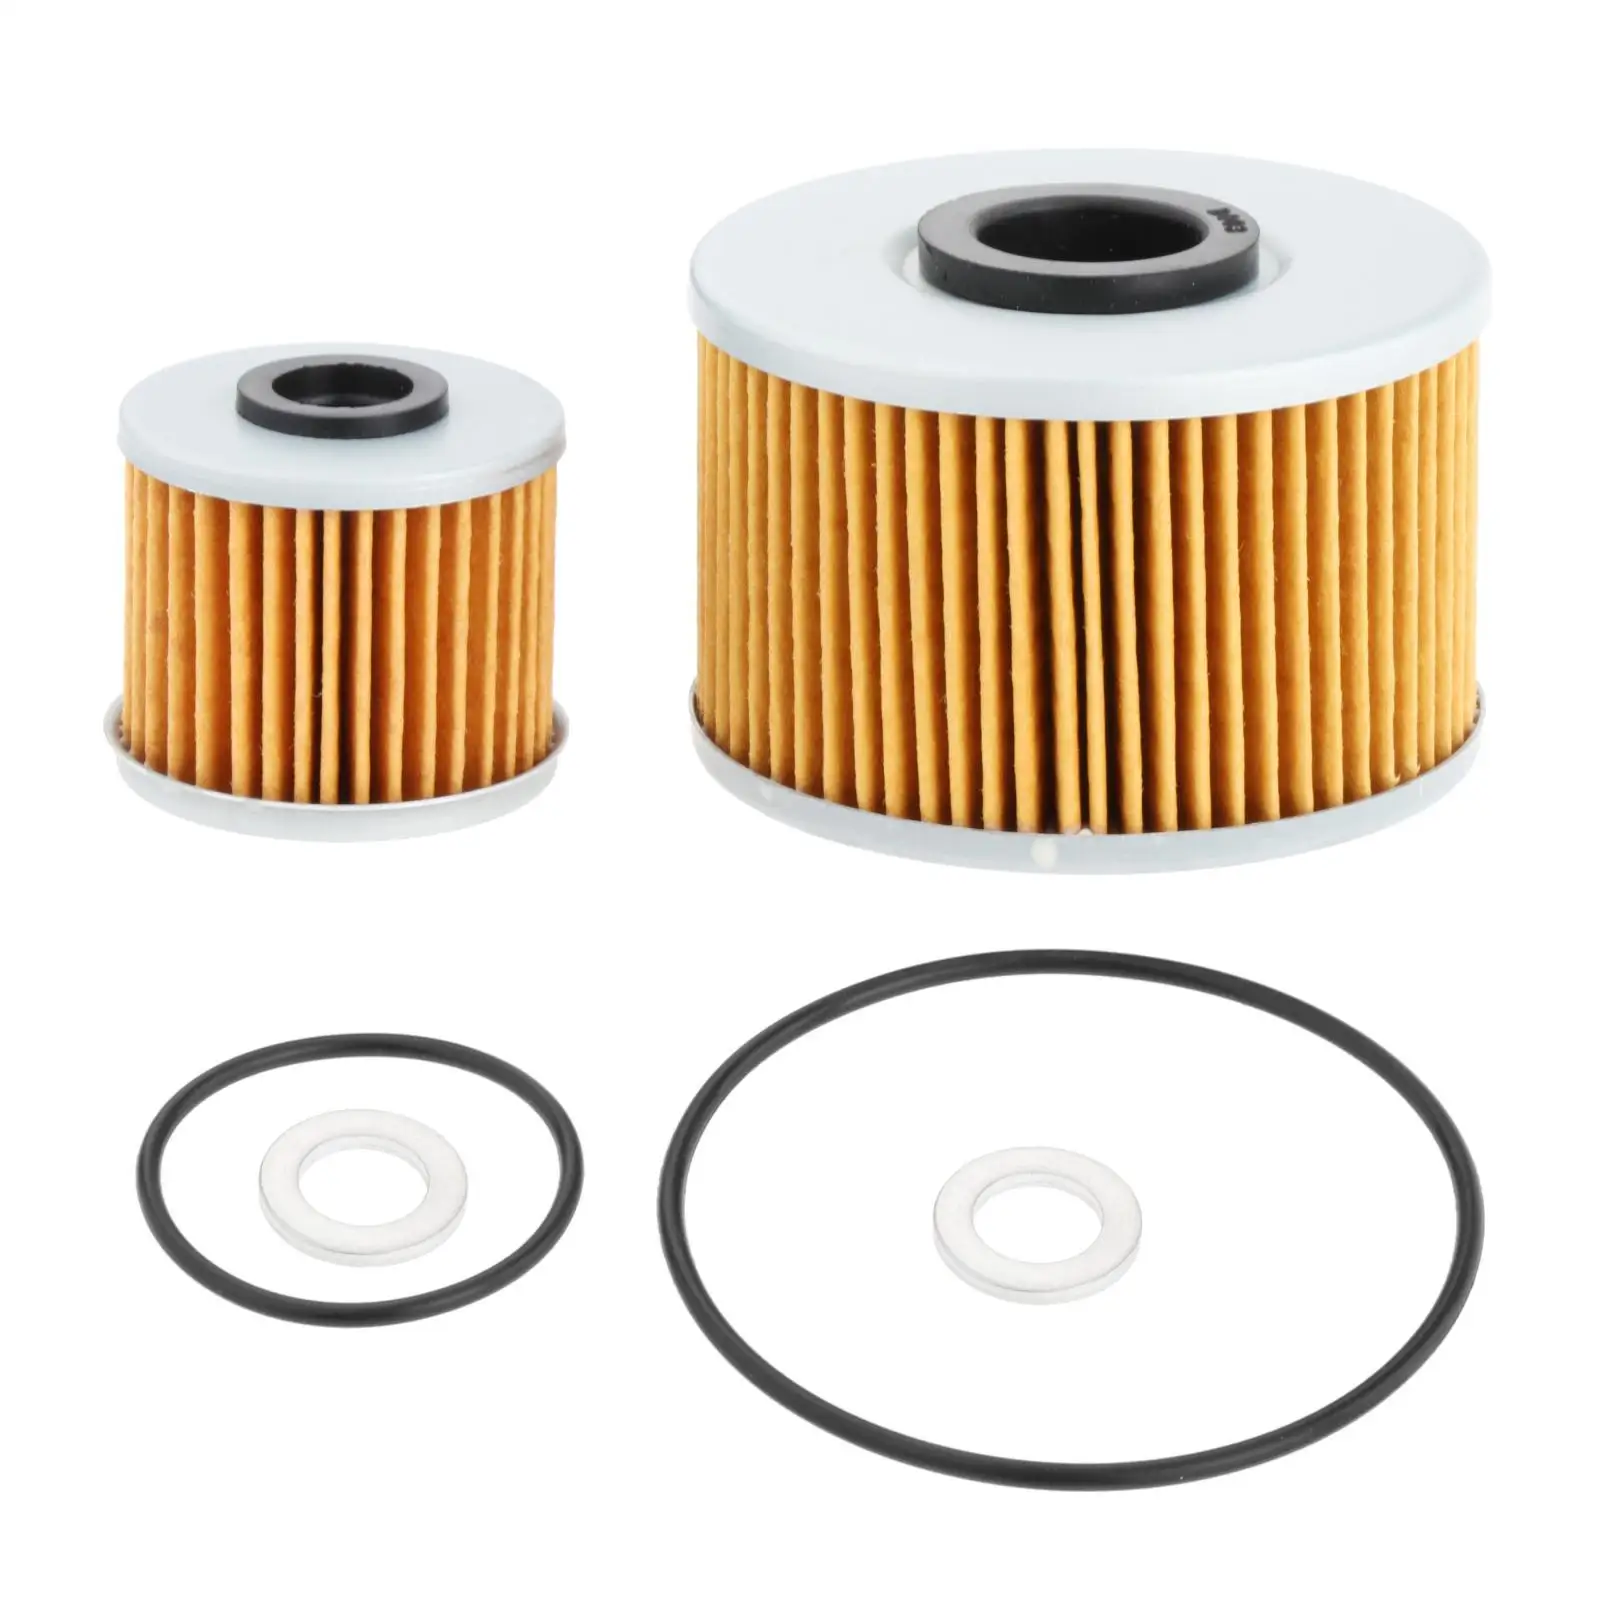 Oil Filter Replacement Kit 15412HP7A01 91302PA9003 Fit for Honda Crf1000L